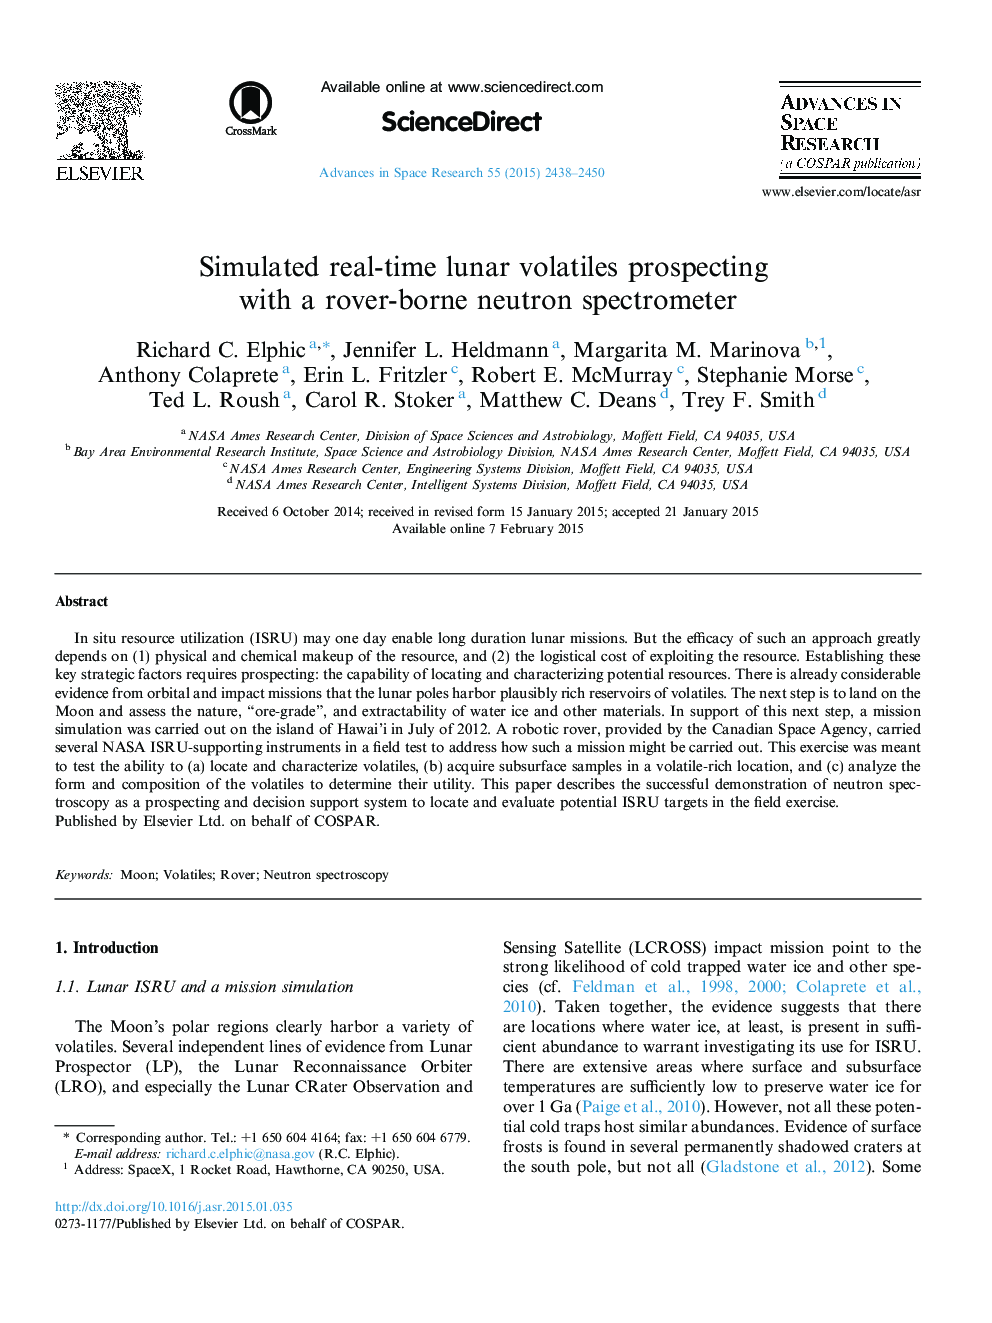 Simulated real-time lunar volatiles prospecting with a rover-borne neutron spectrometer